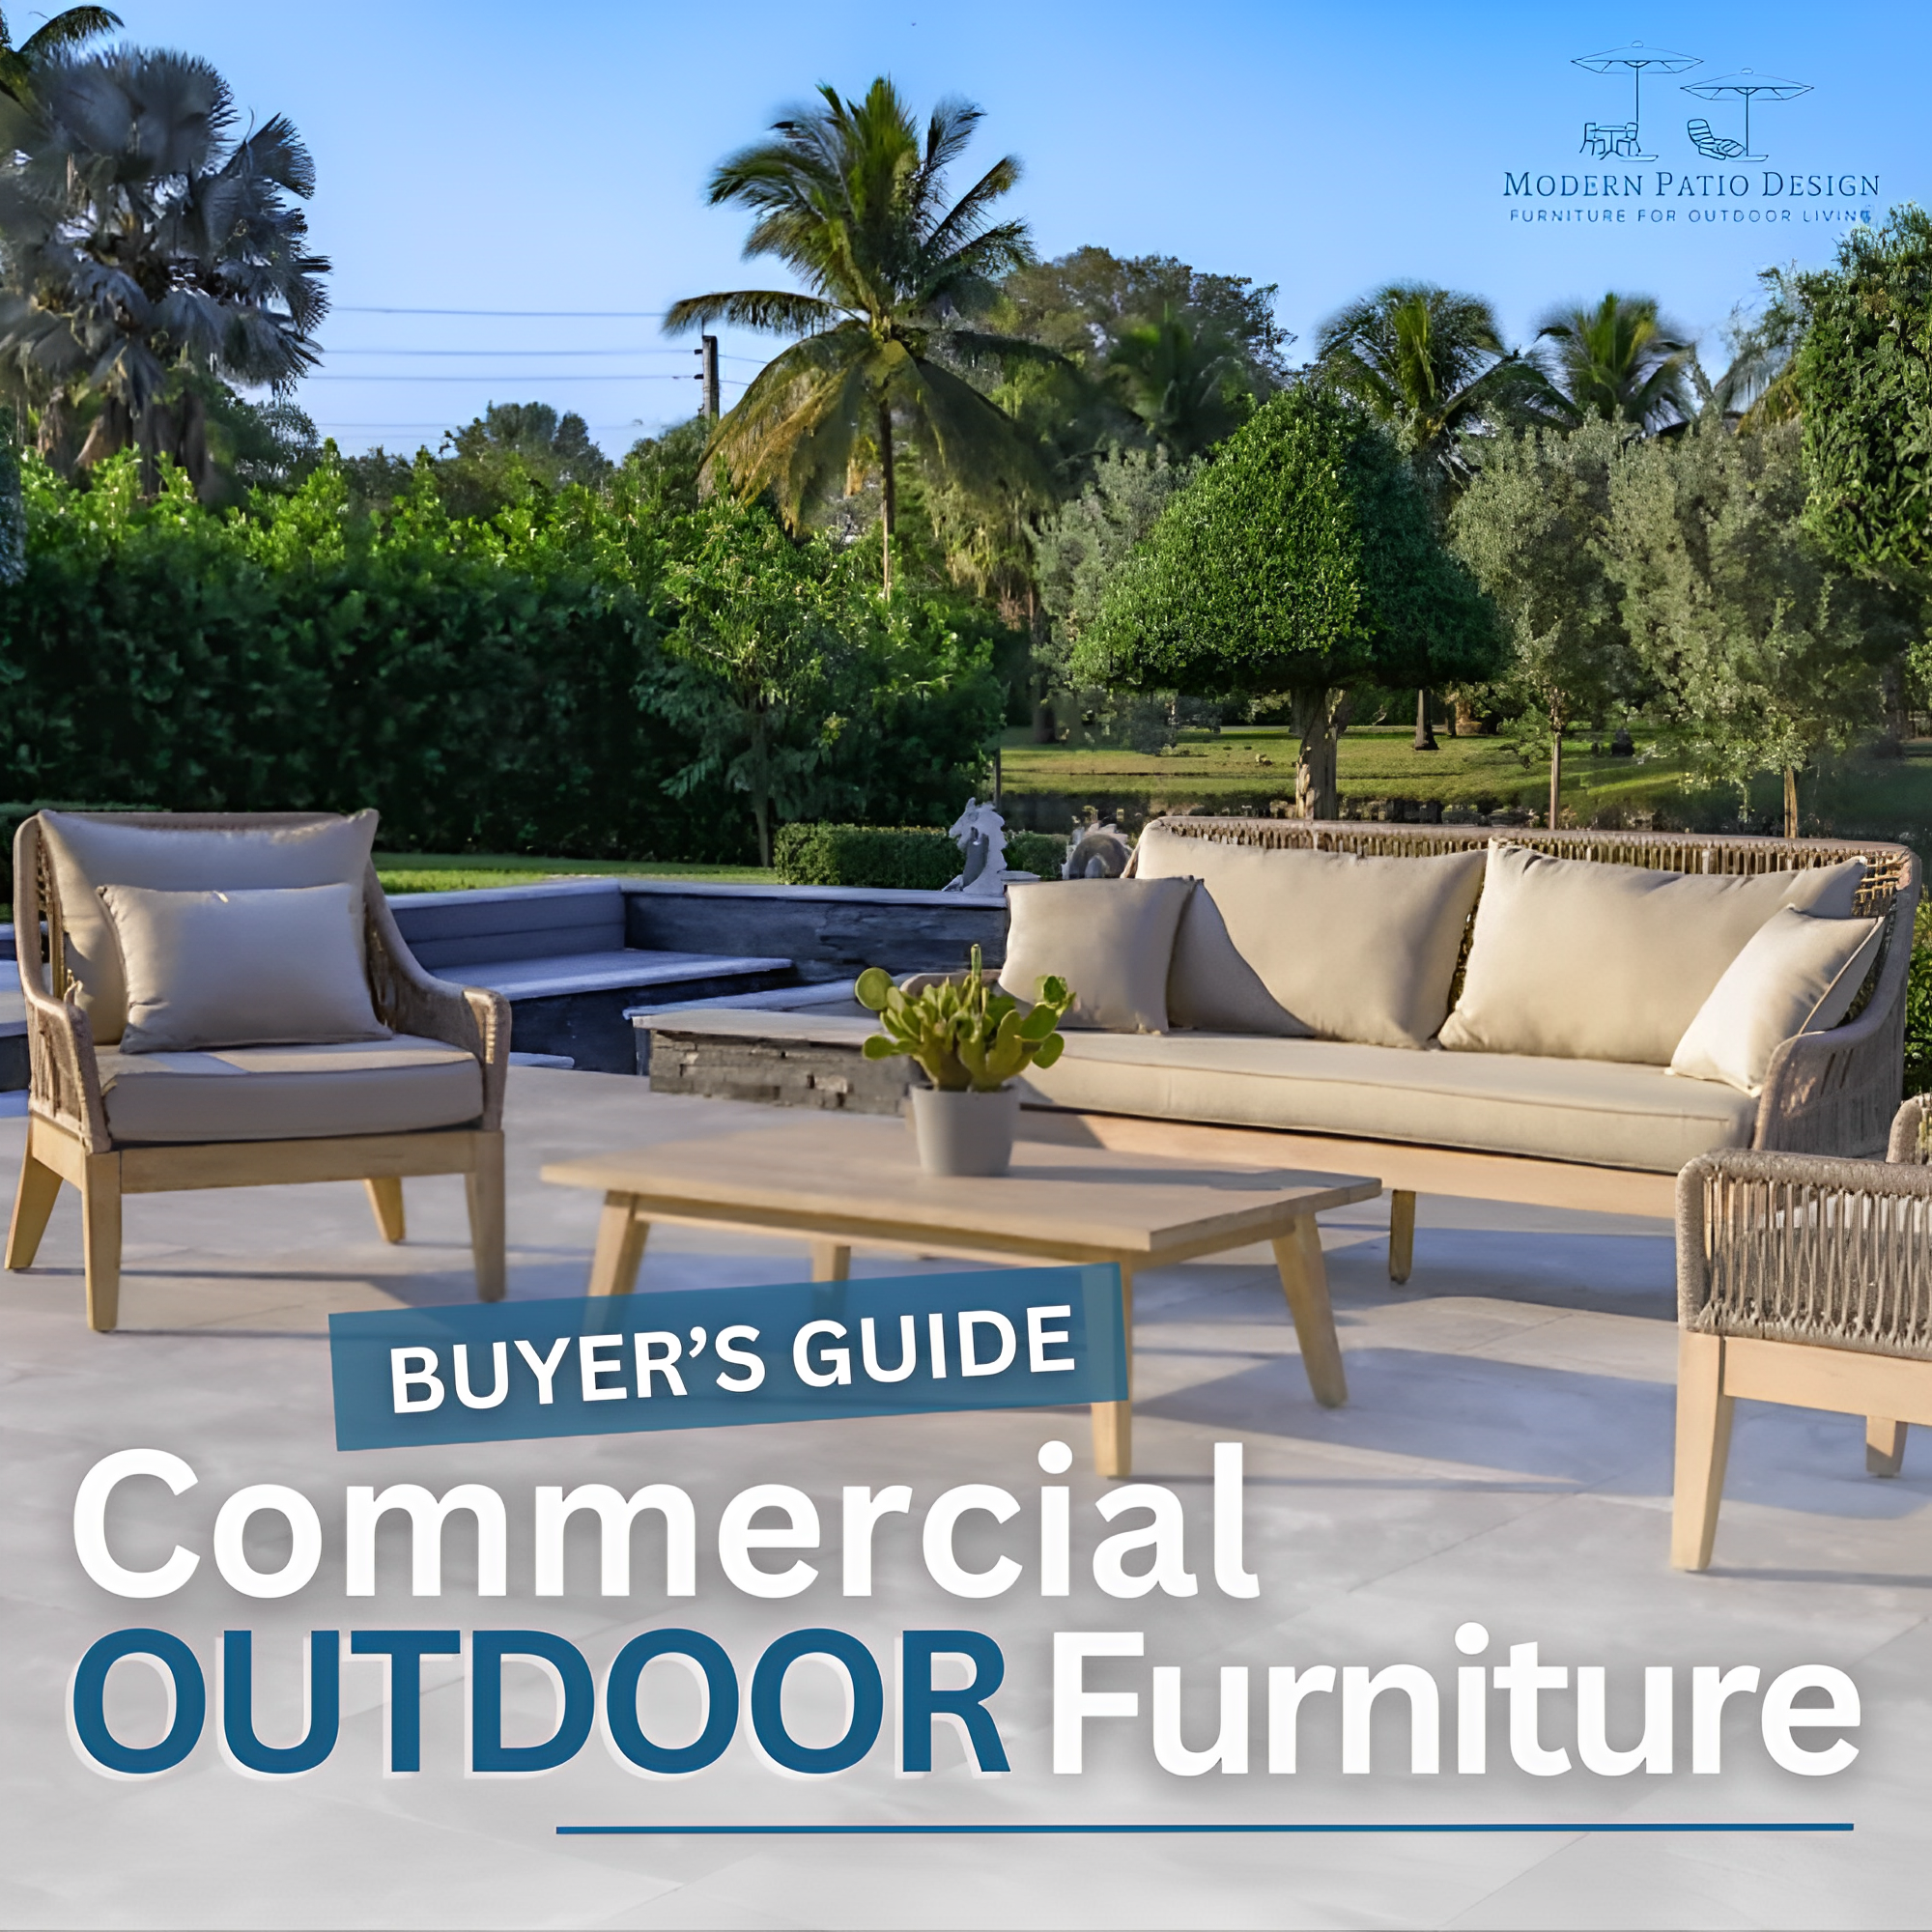 Best Commercial Outdoor Furniture: Guide to Maximizing Your Outdoor Area